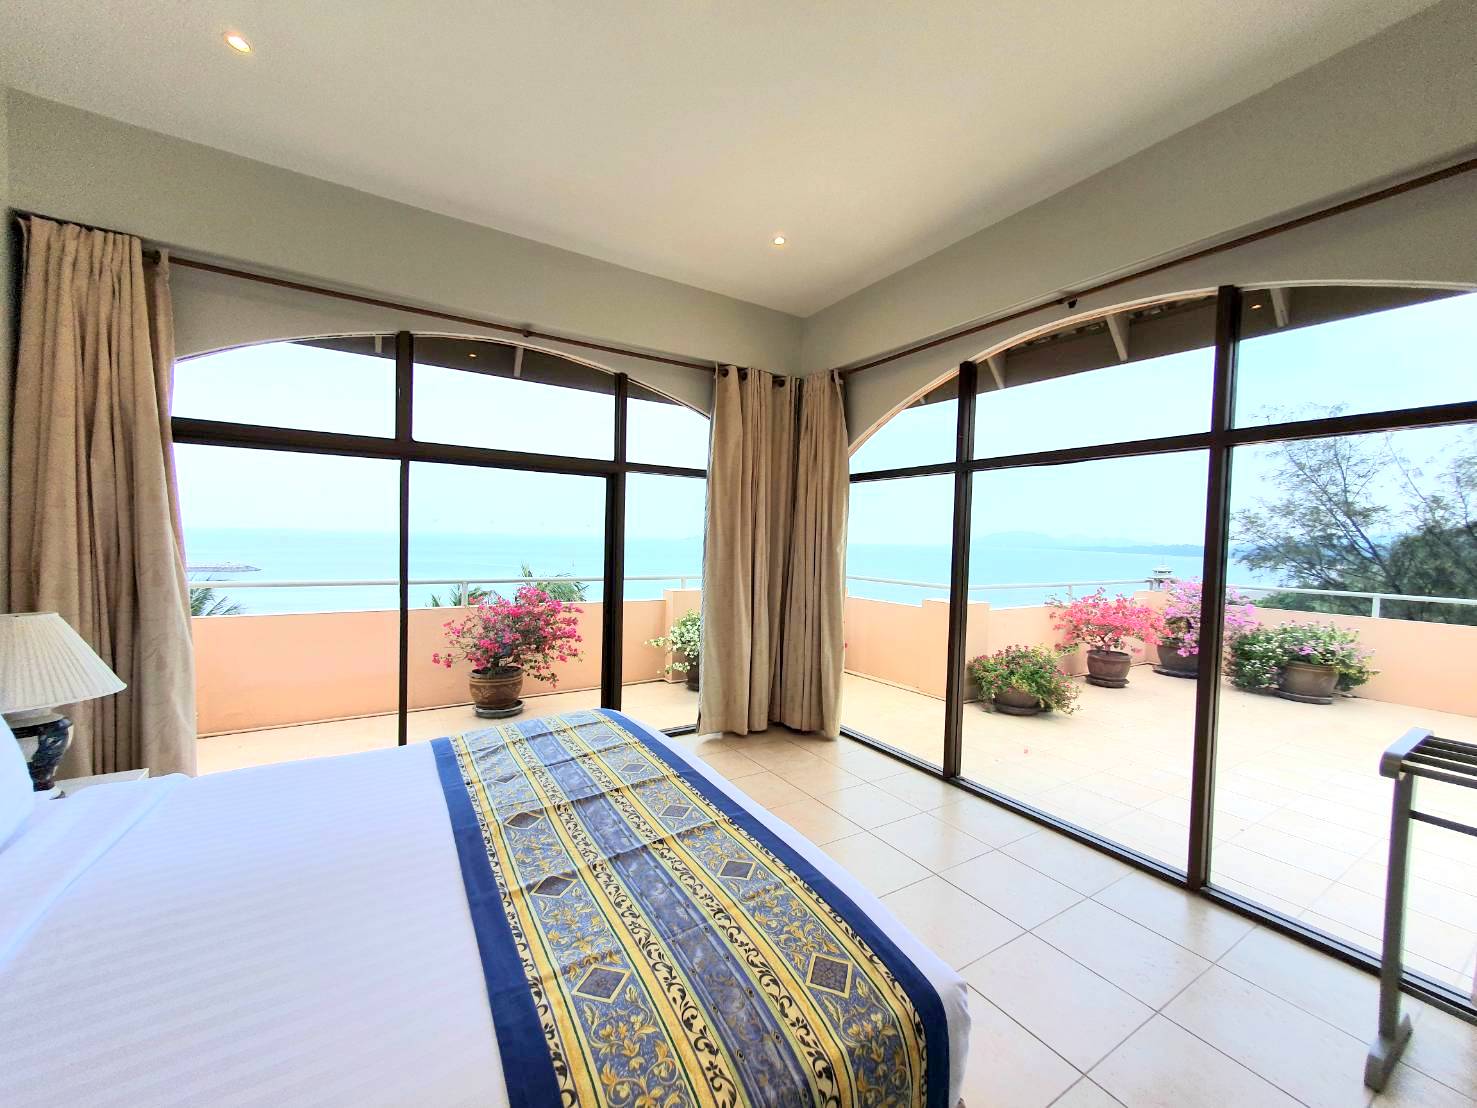 One bedroom with a king size bed, large furnished terrace with plants and flowers facing the sea, separate living room, bathroom with shower.